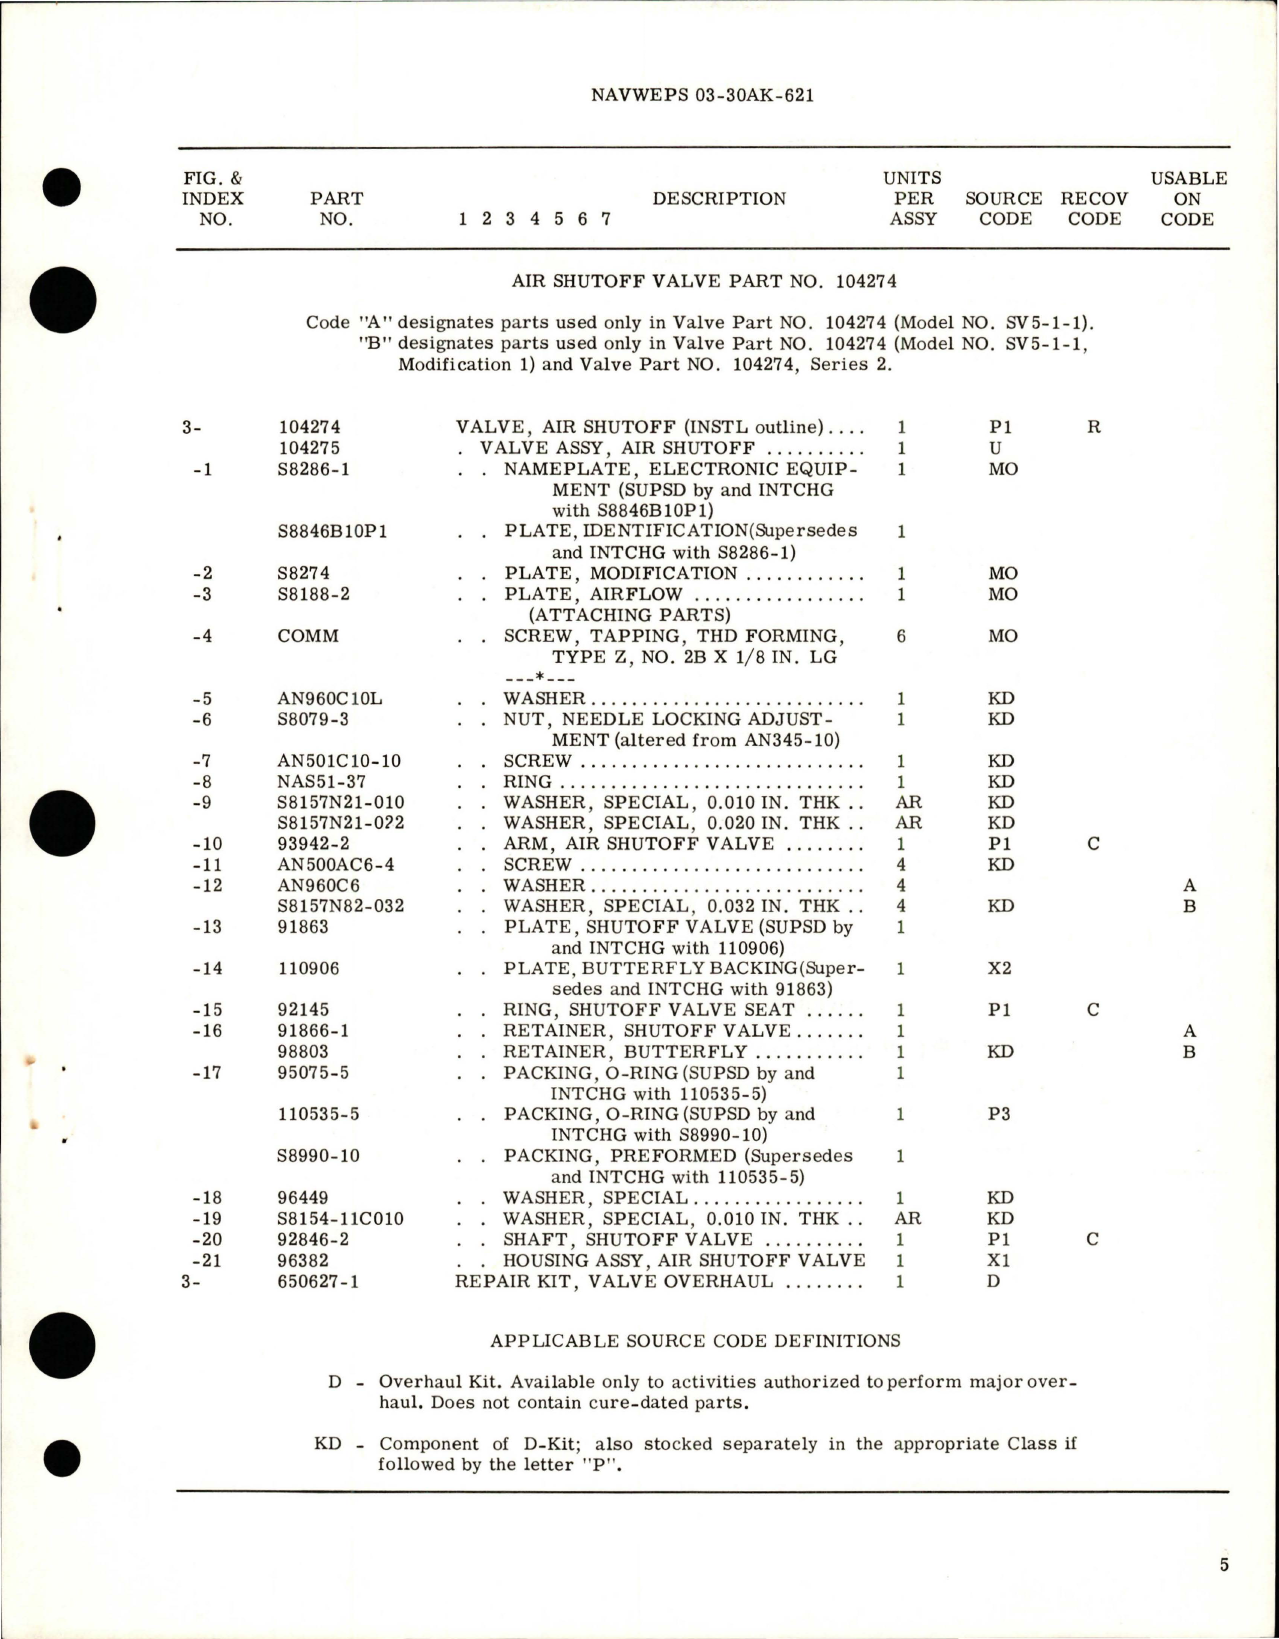 Sample page 5 from AirCorps Library document: Overhaul Instructions with Parts Breakdown for Air Shutoff Valve - Part 104274